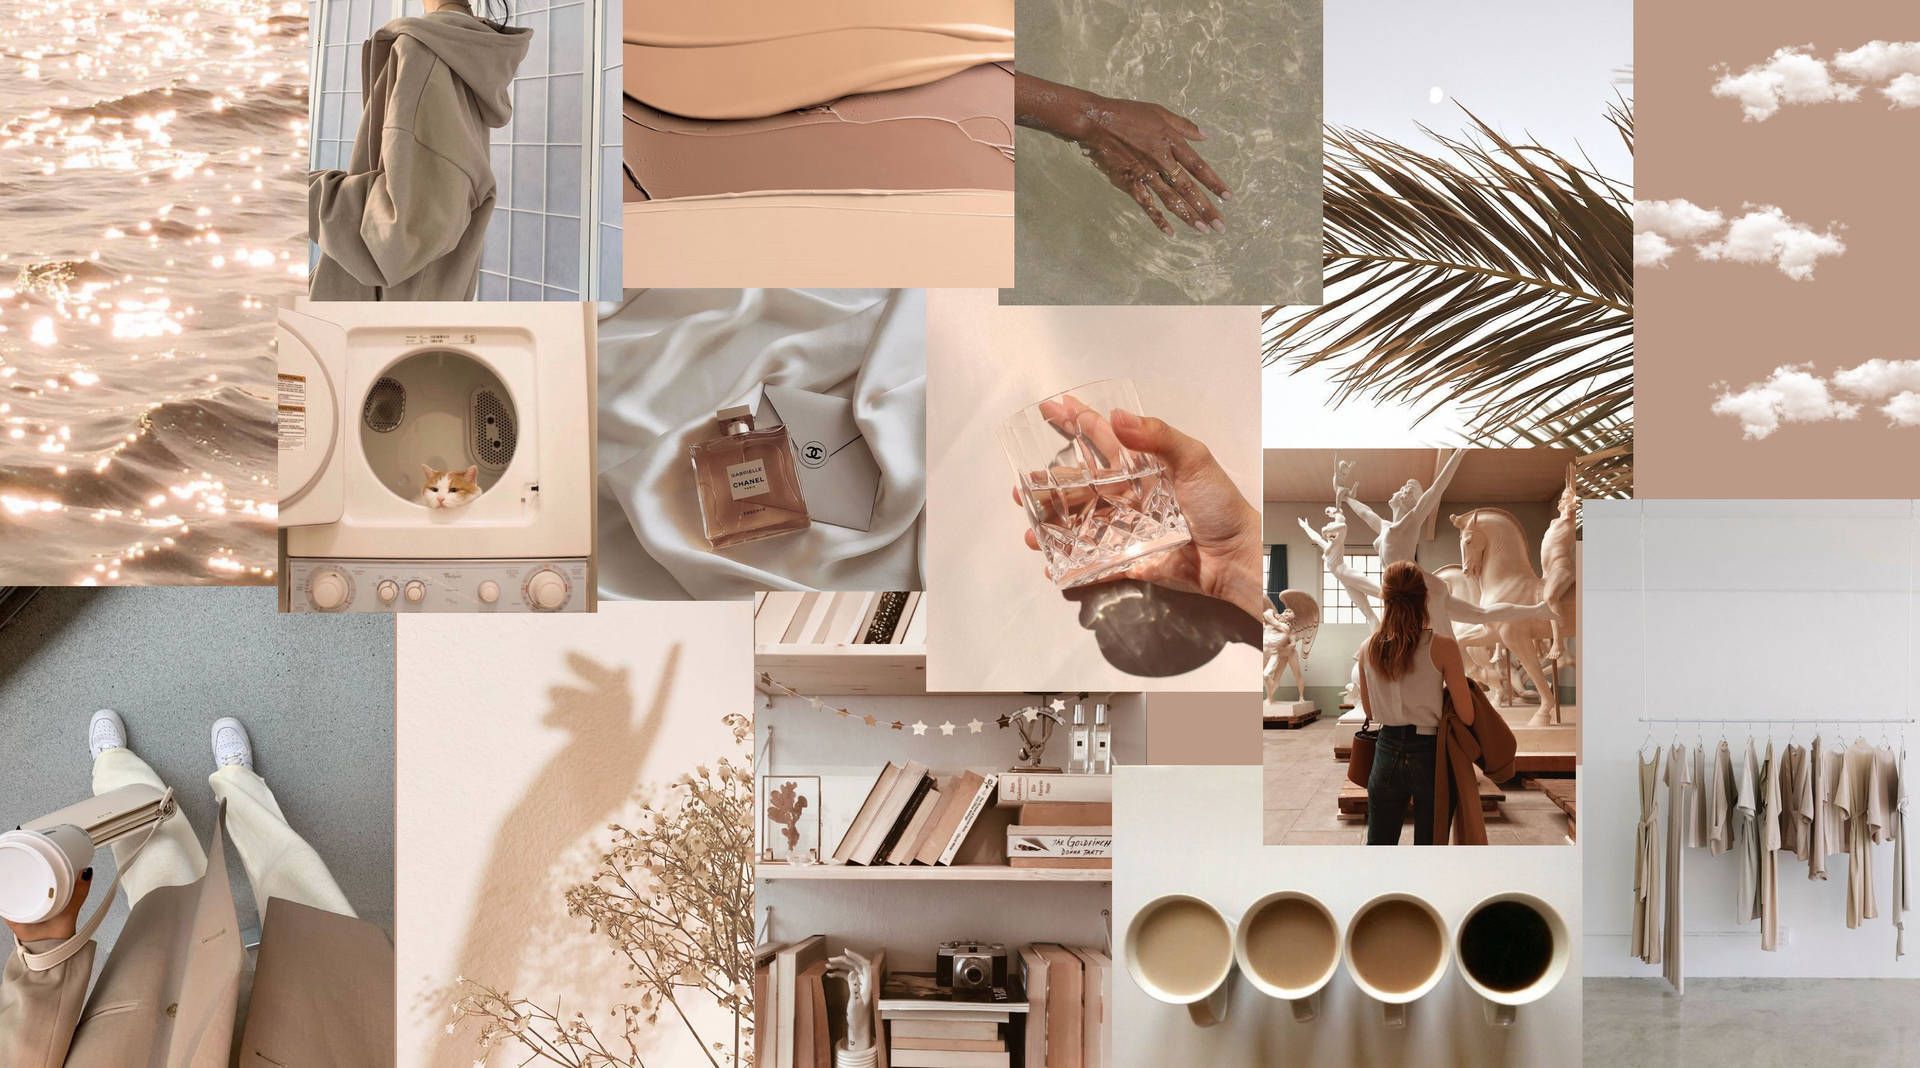 Free Beige Aesthetic Collage Wallpaper Downloads, Beige Aesthetic Collage Wallpaper for FREE